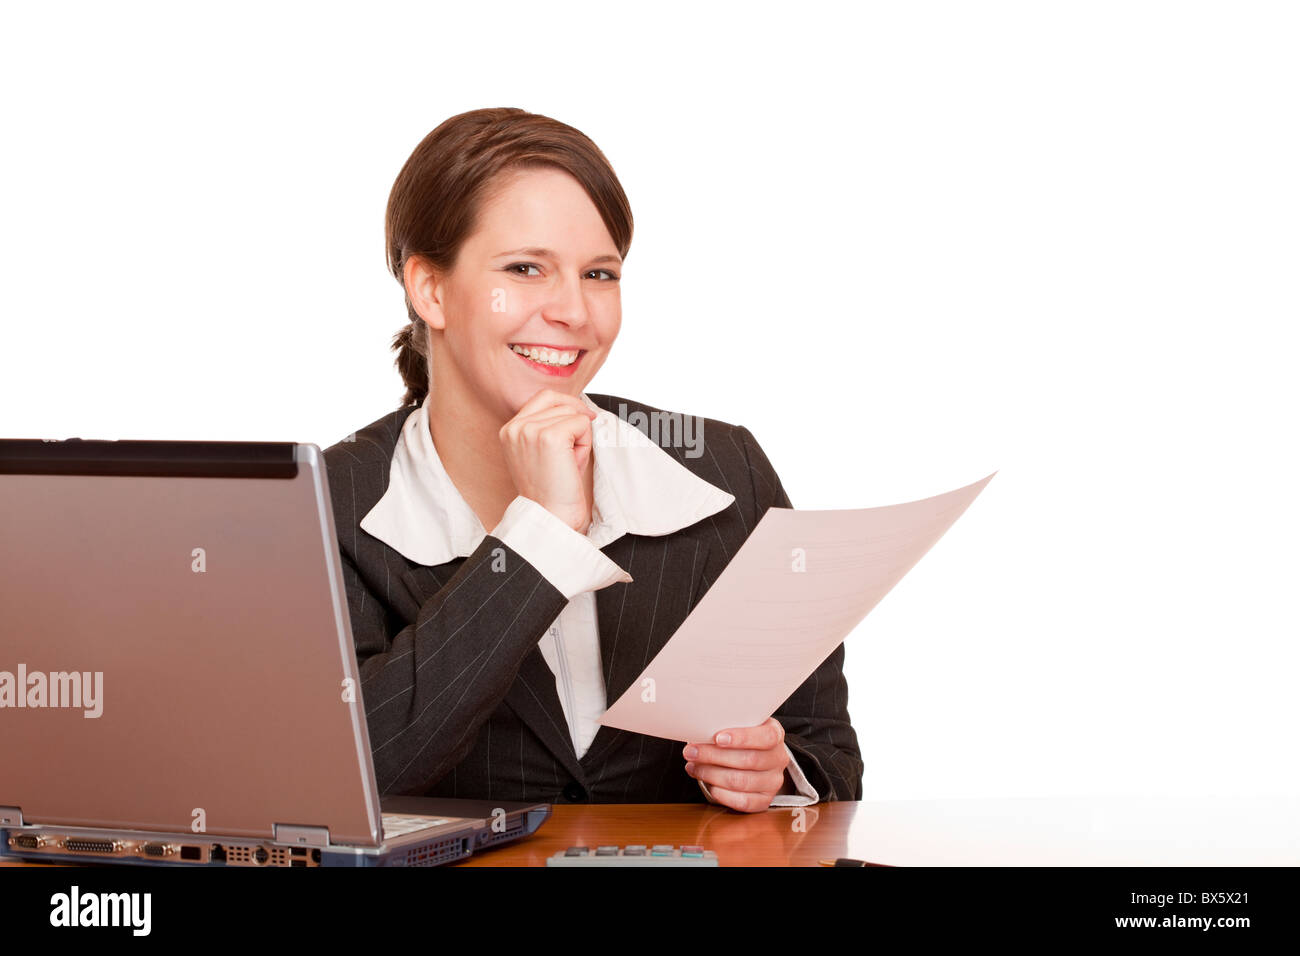 Happy  business woman in office holding a contract. Isolated on white background. Stock Photo